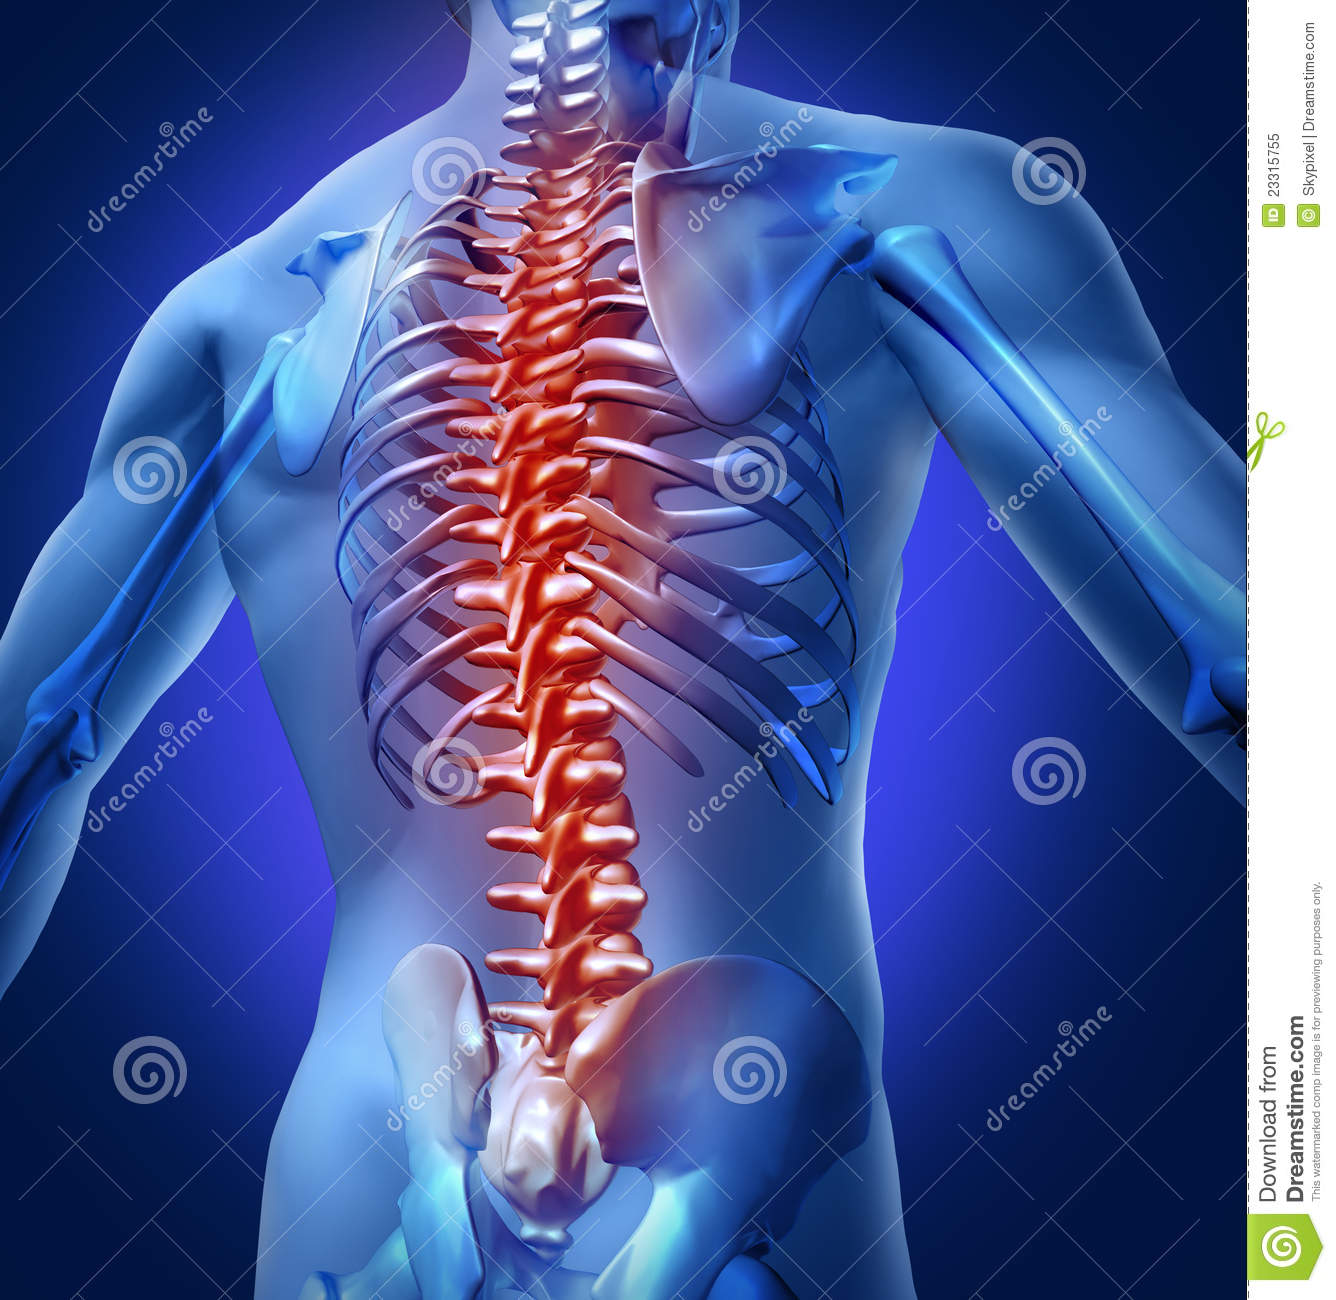 Human Backache And Back Pain With An Upper Torso Body Skeleton Showing